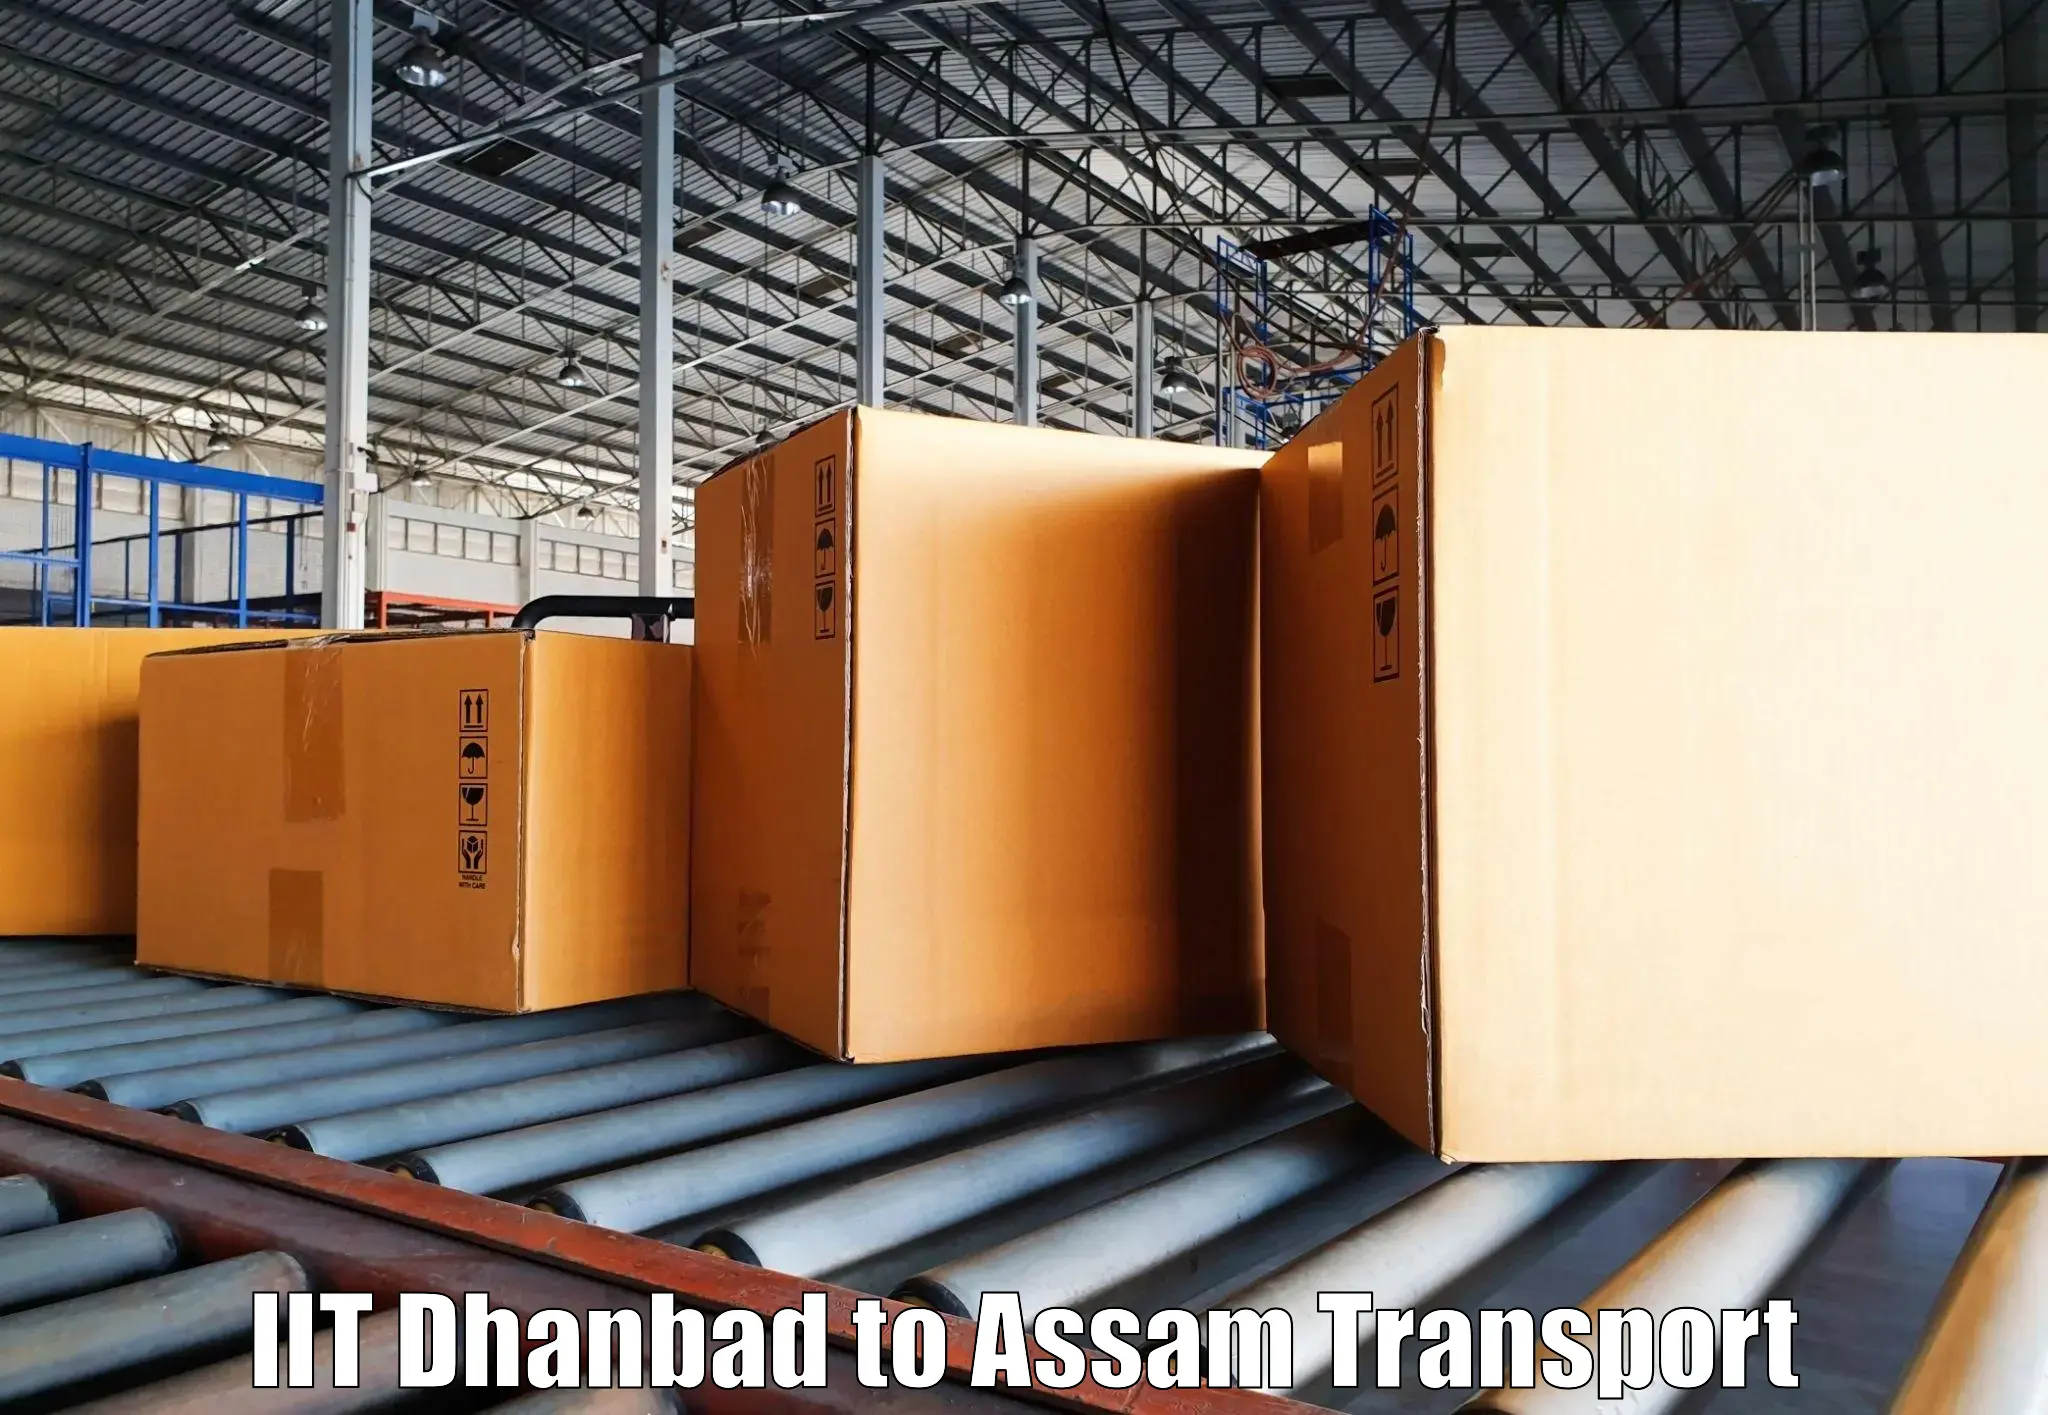 Container transport service IIT Dhanbad to Tihu